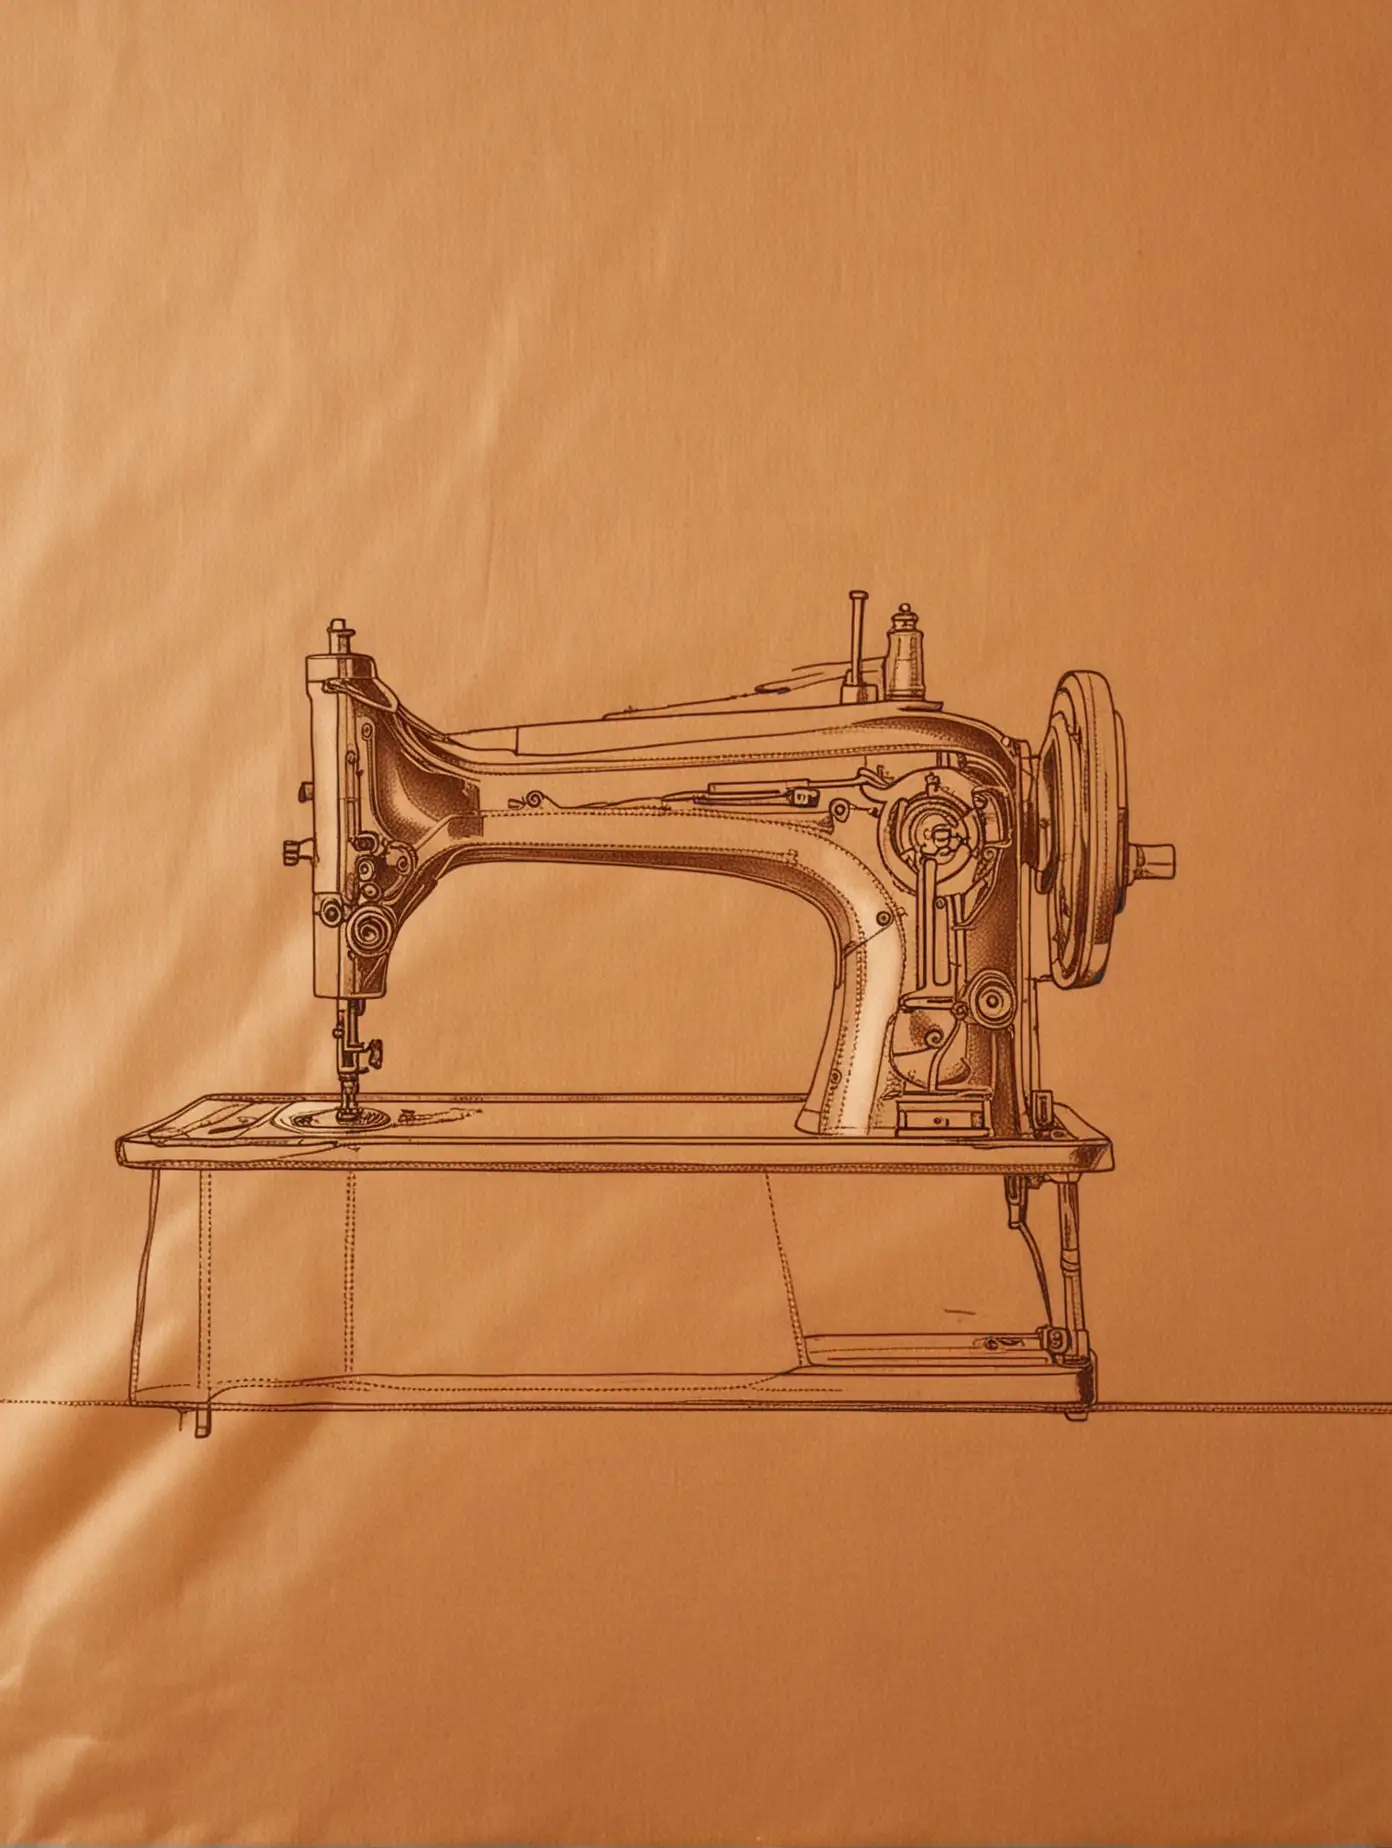 Stylized Sewing Machine Outline on Smooth Brown Tissue Paper